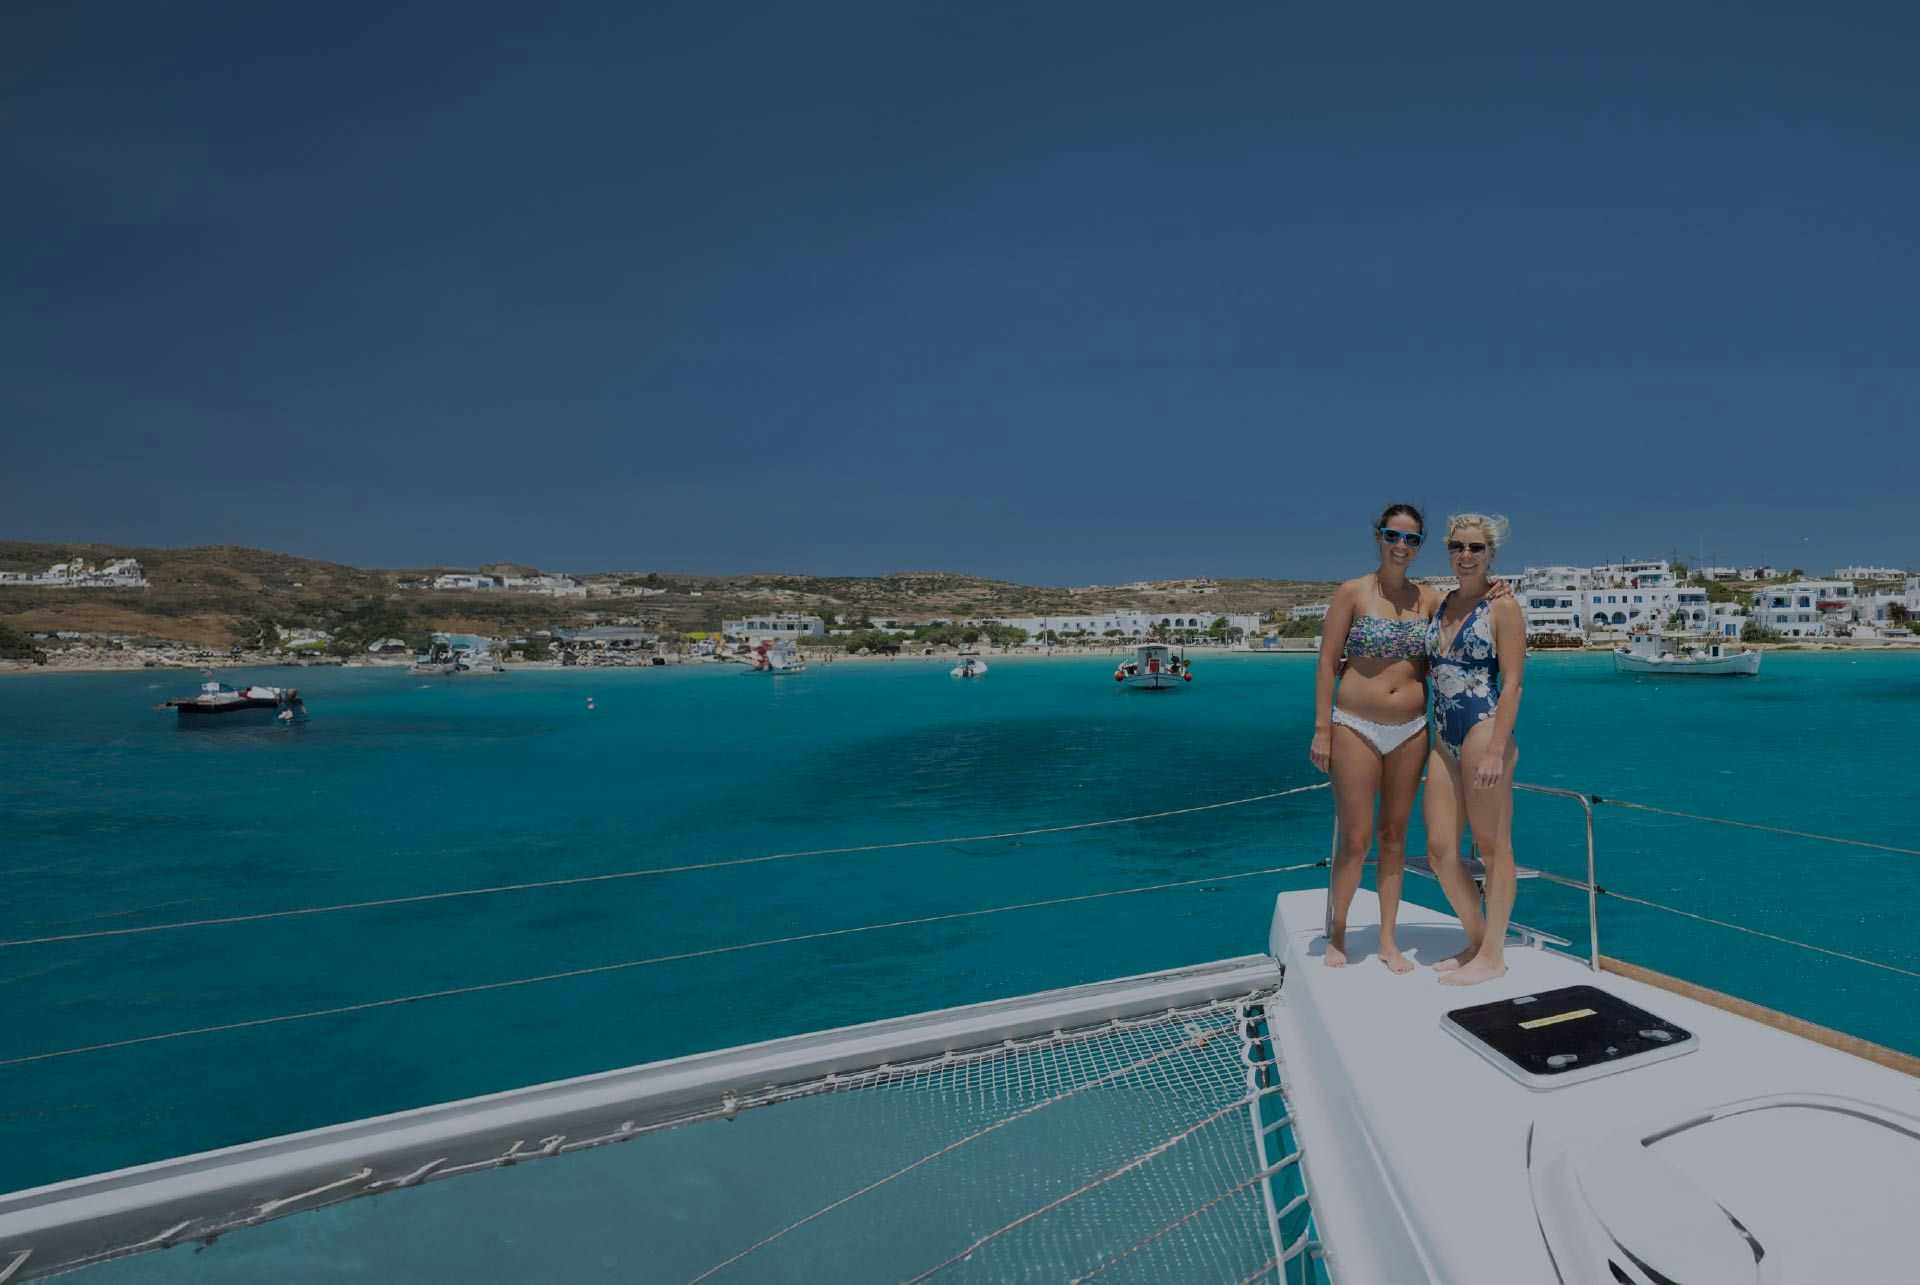 Two women pose for a photo on the bow of a yacht in Greece